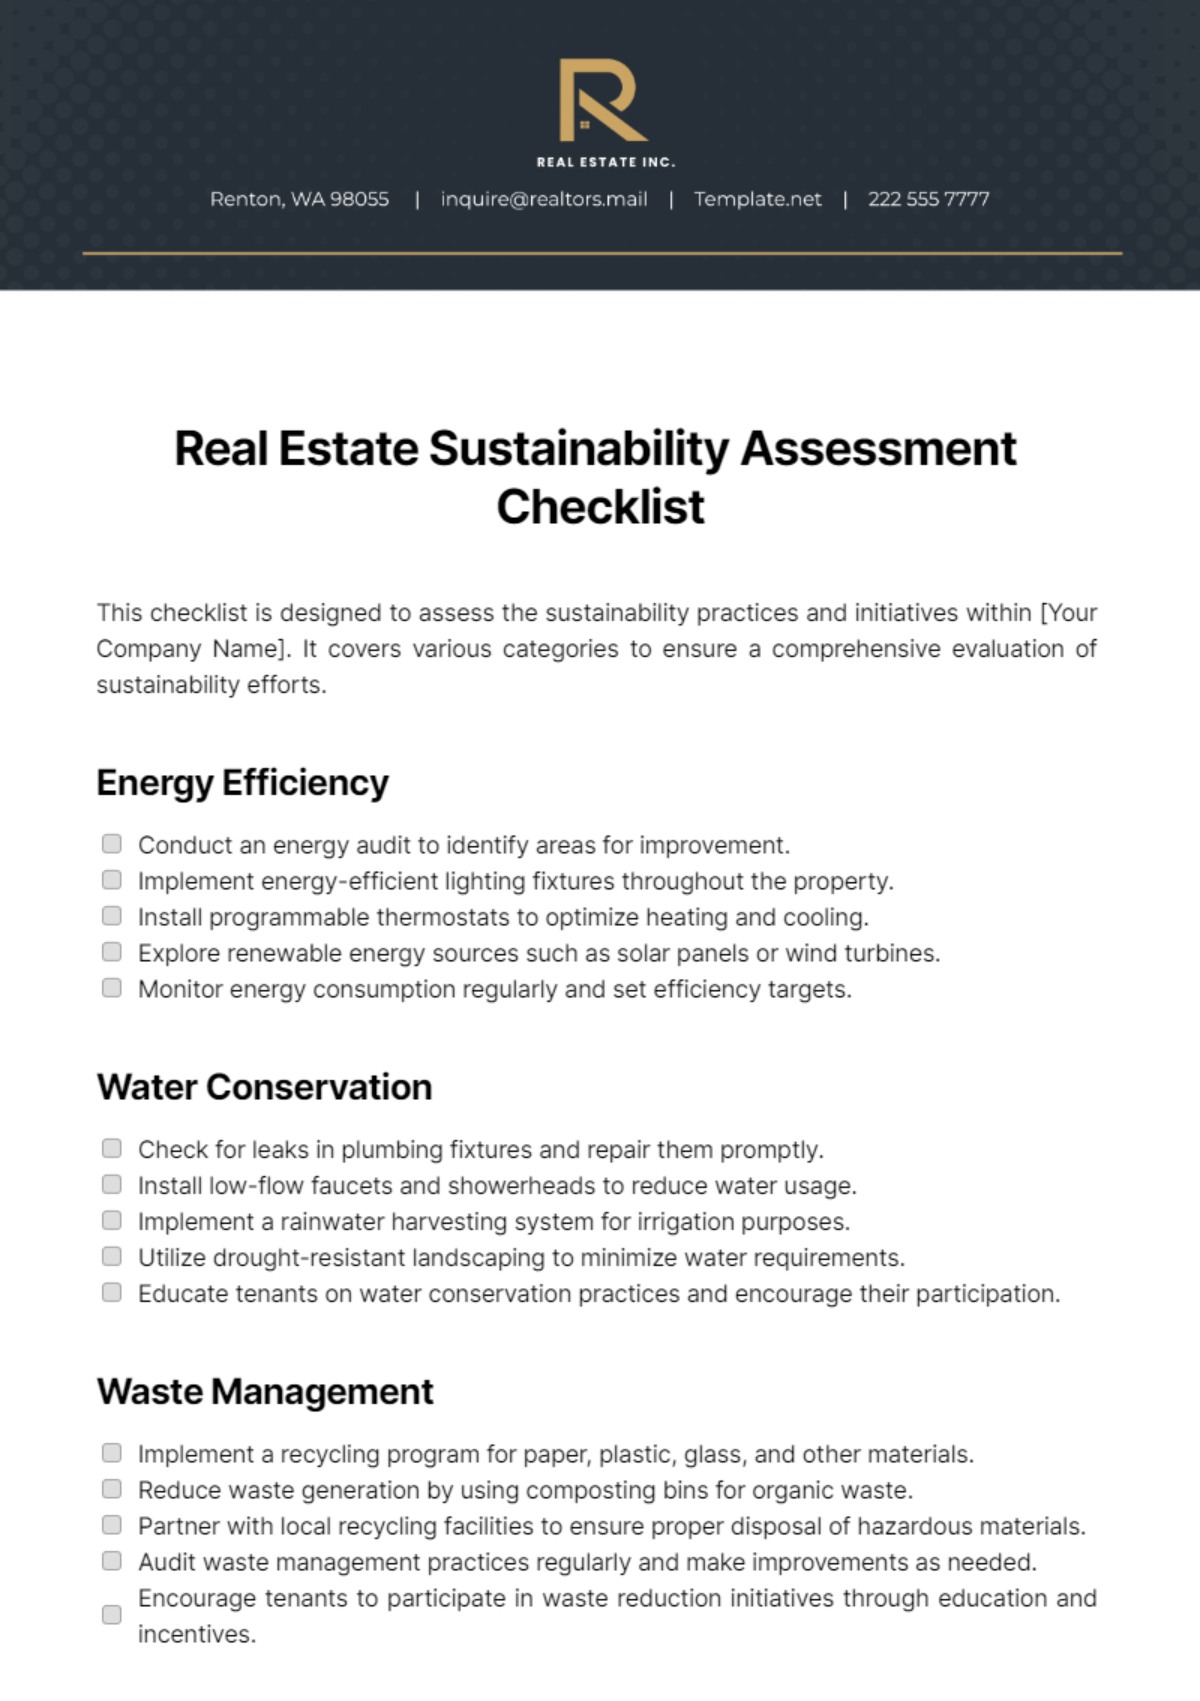 Free Real Estate Sustainability Assessment Checklist Template